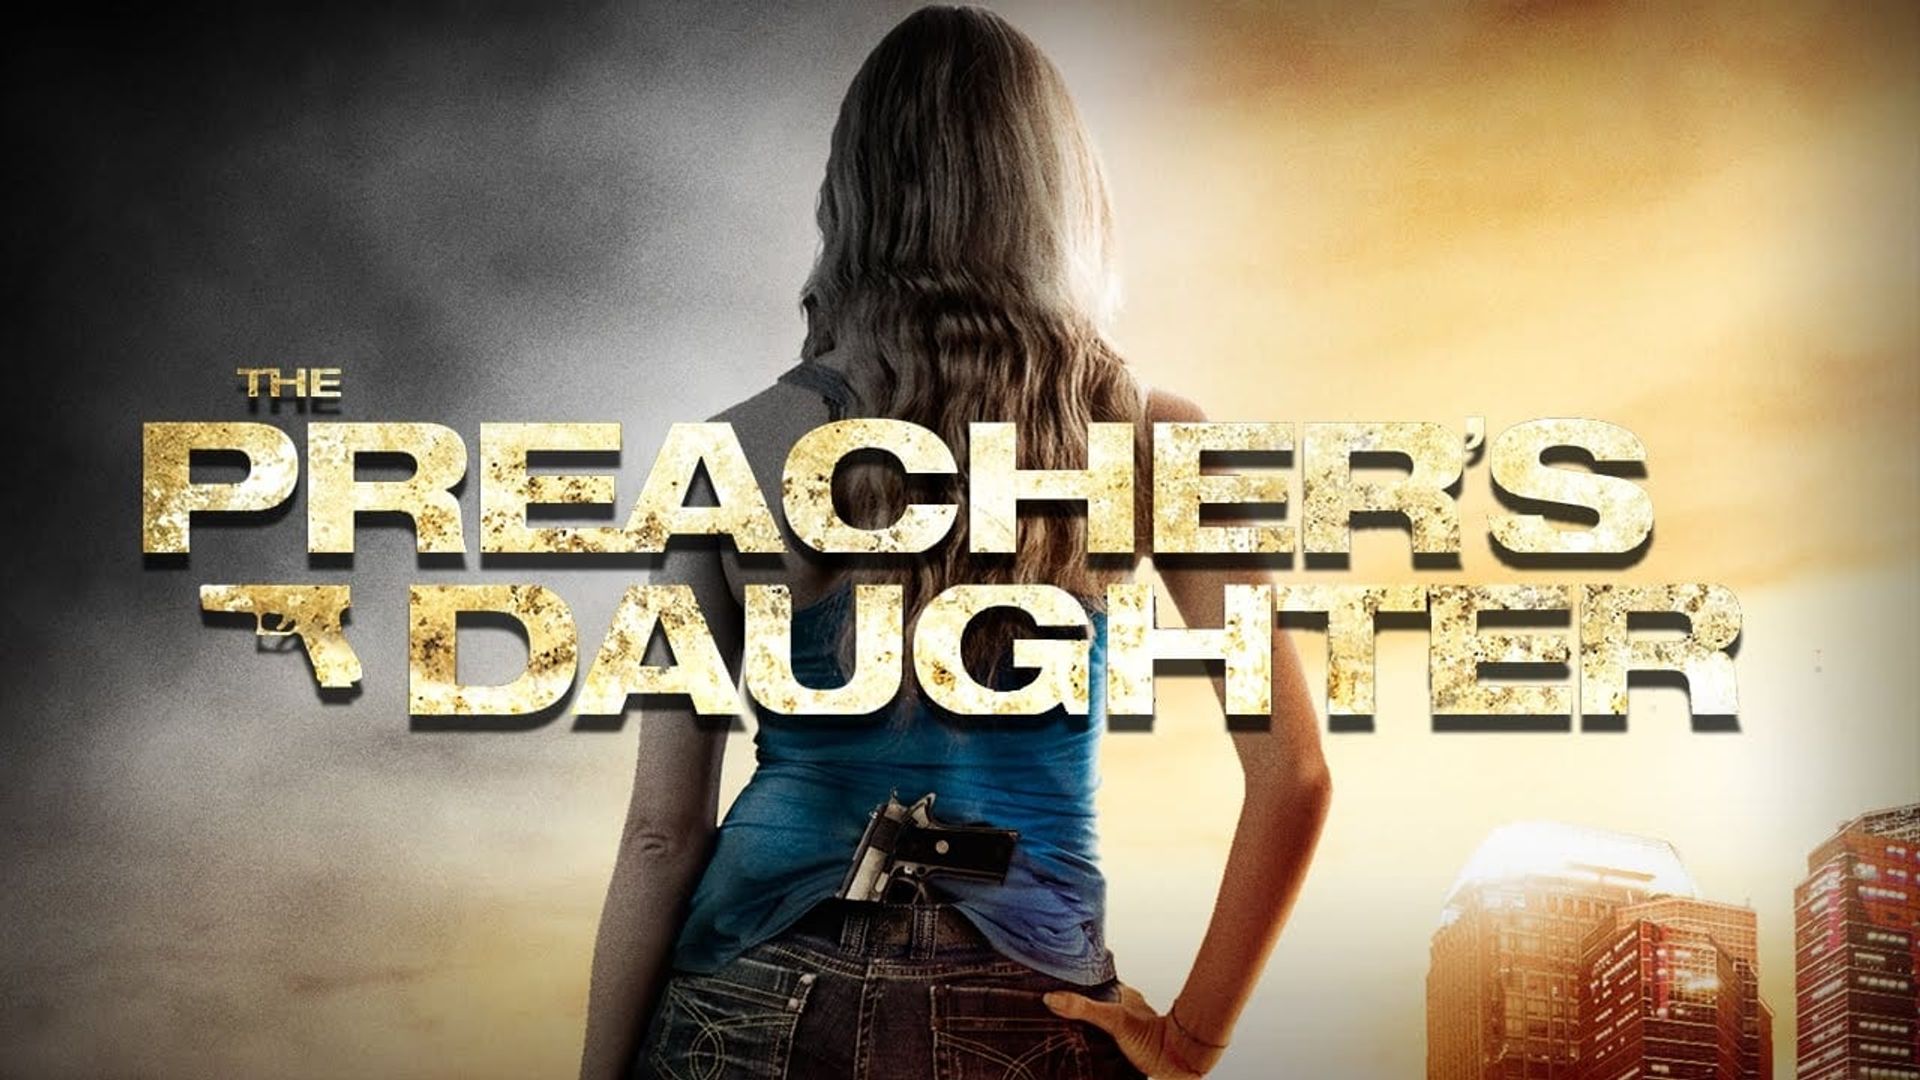 The Preacher's Daughter background